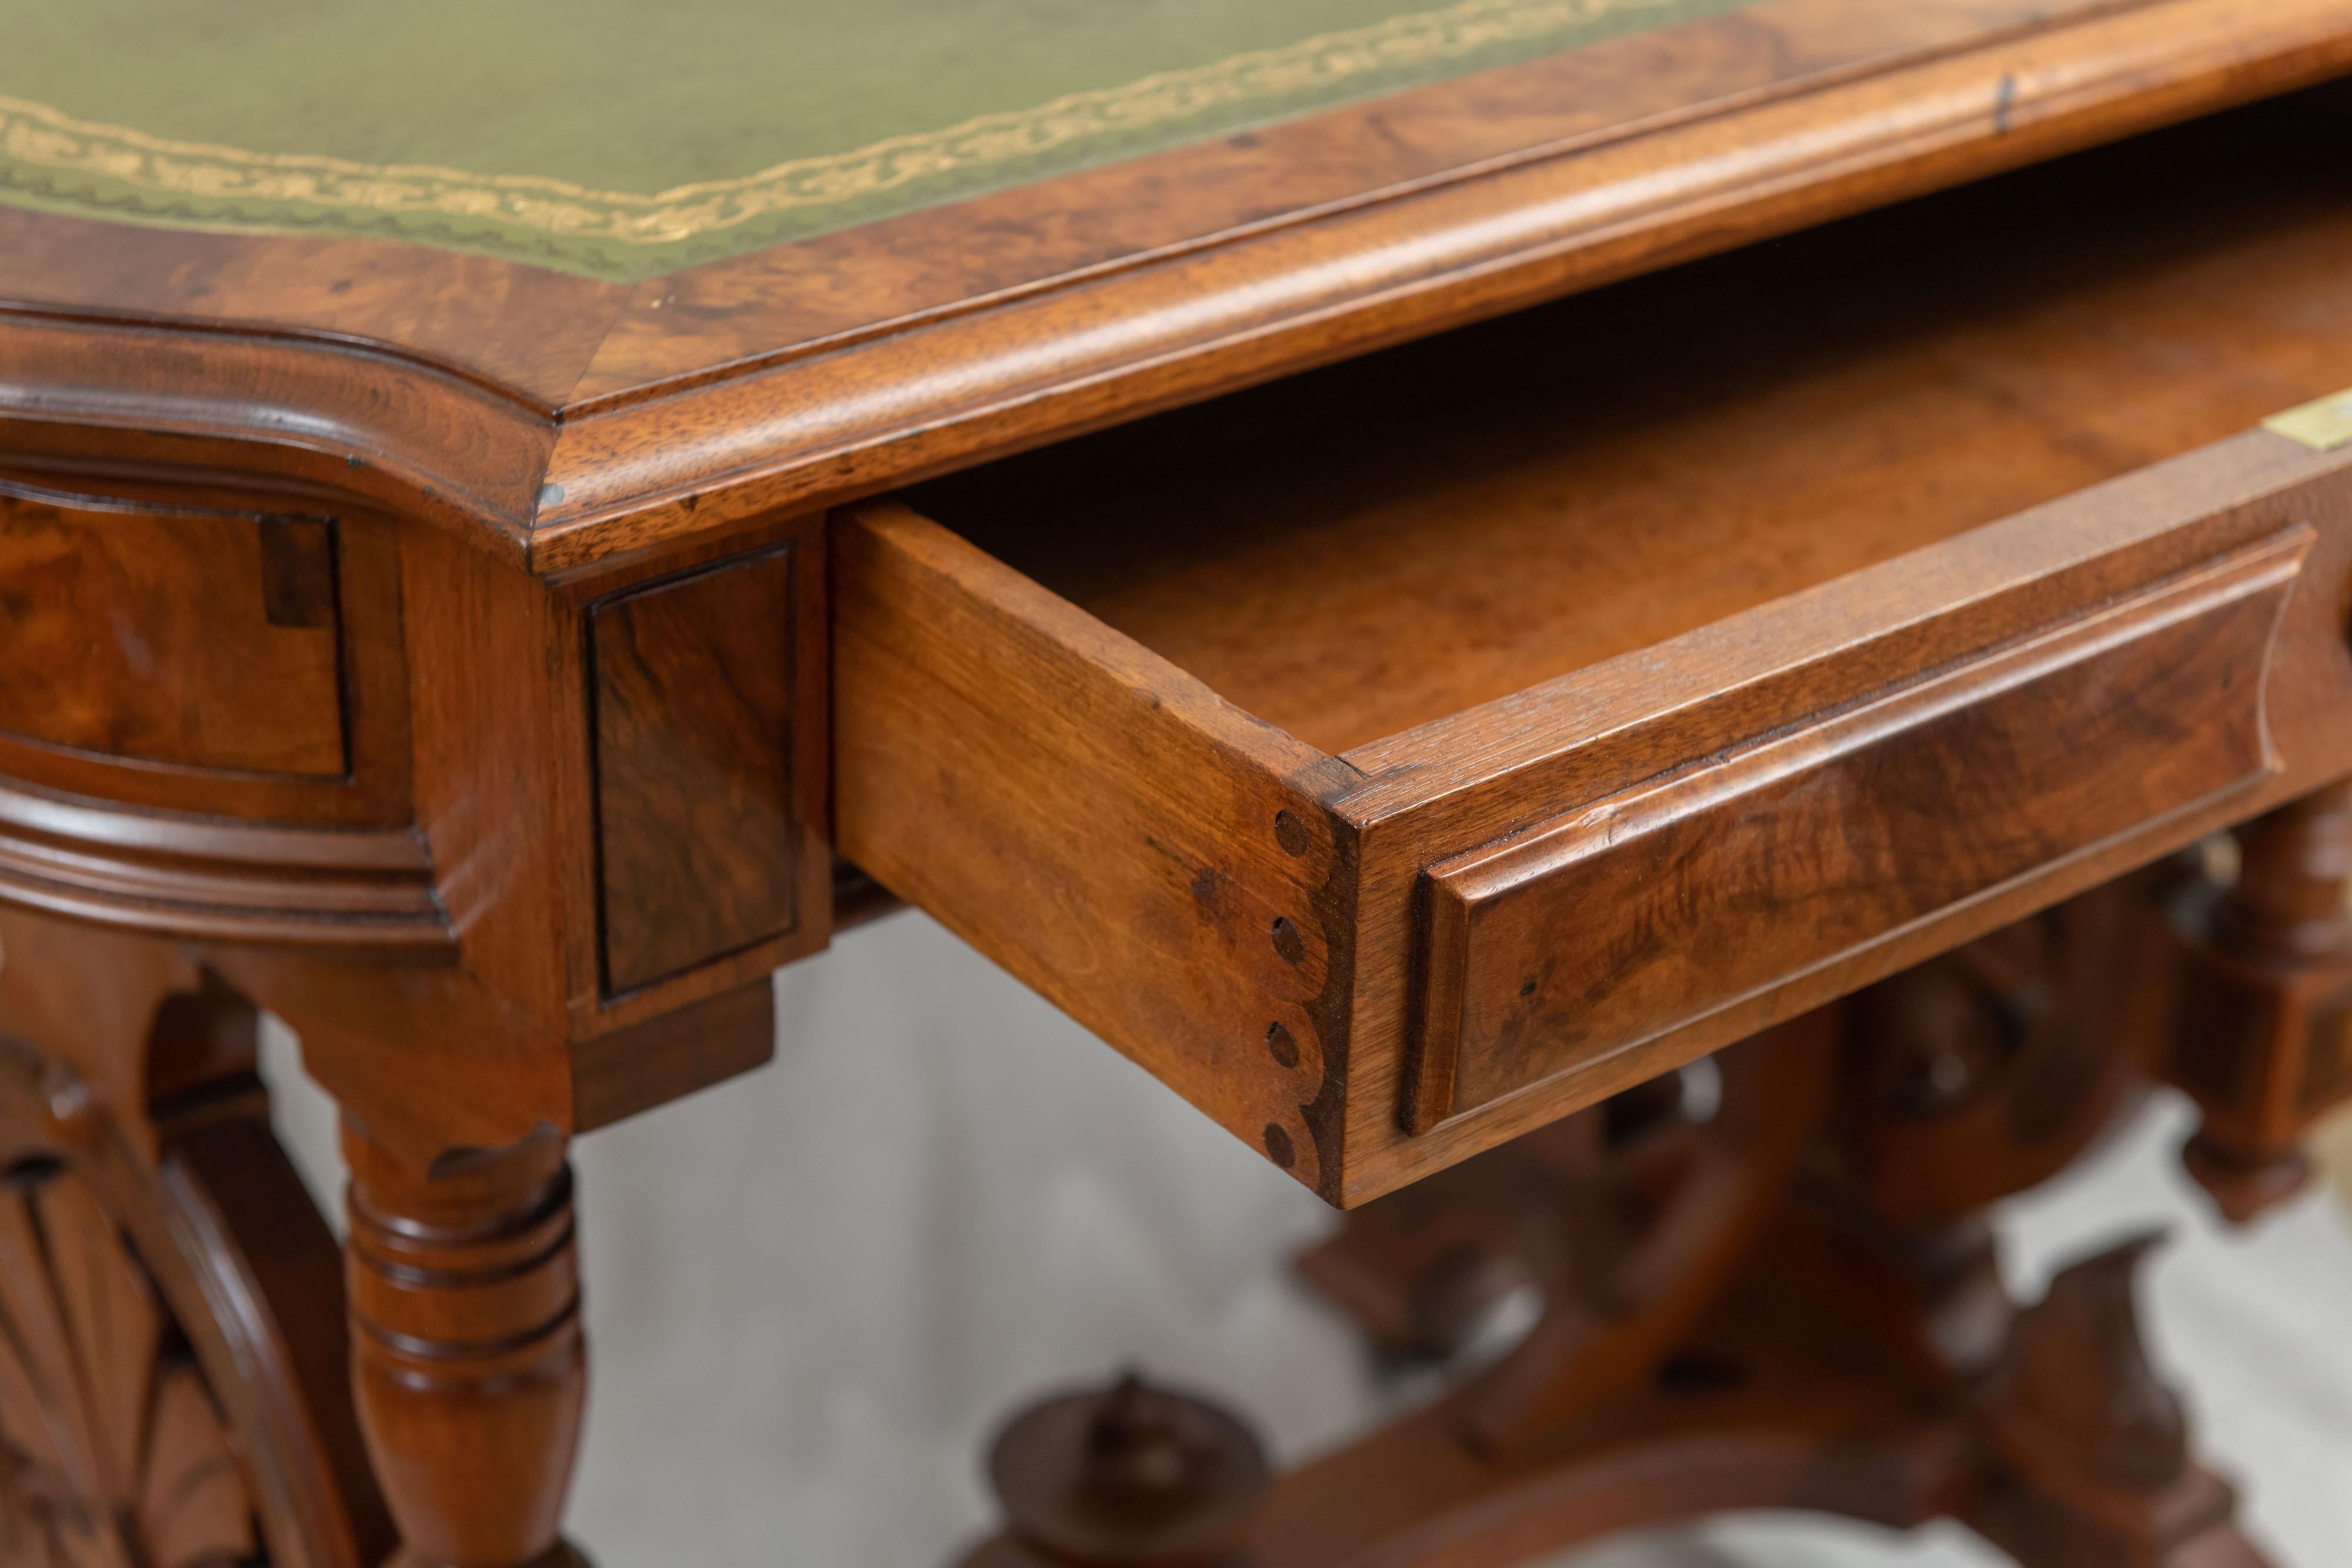 Late 19th Century Renaissance Revival Walnut & Burl Writing Table w/ Leather Top, ca. 1870